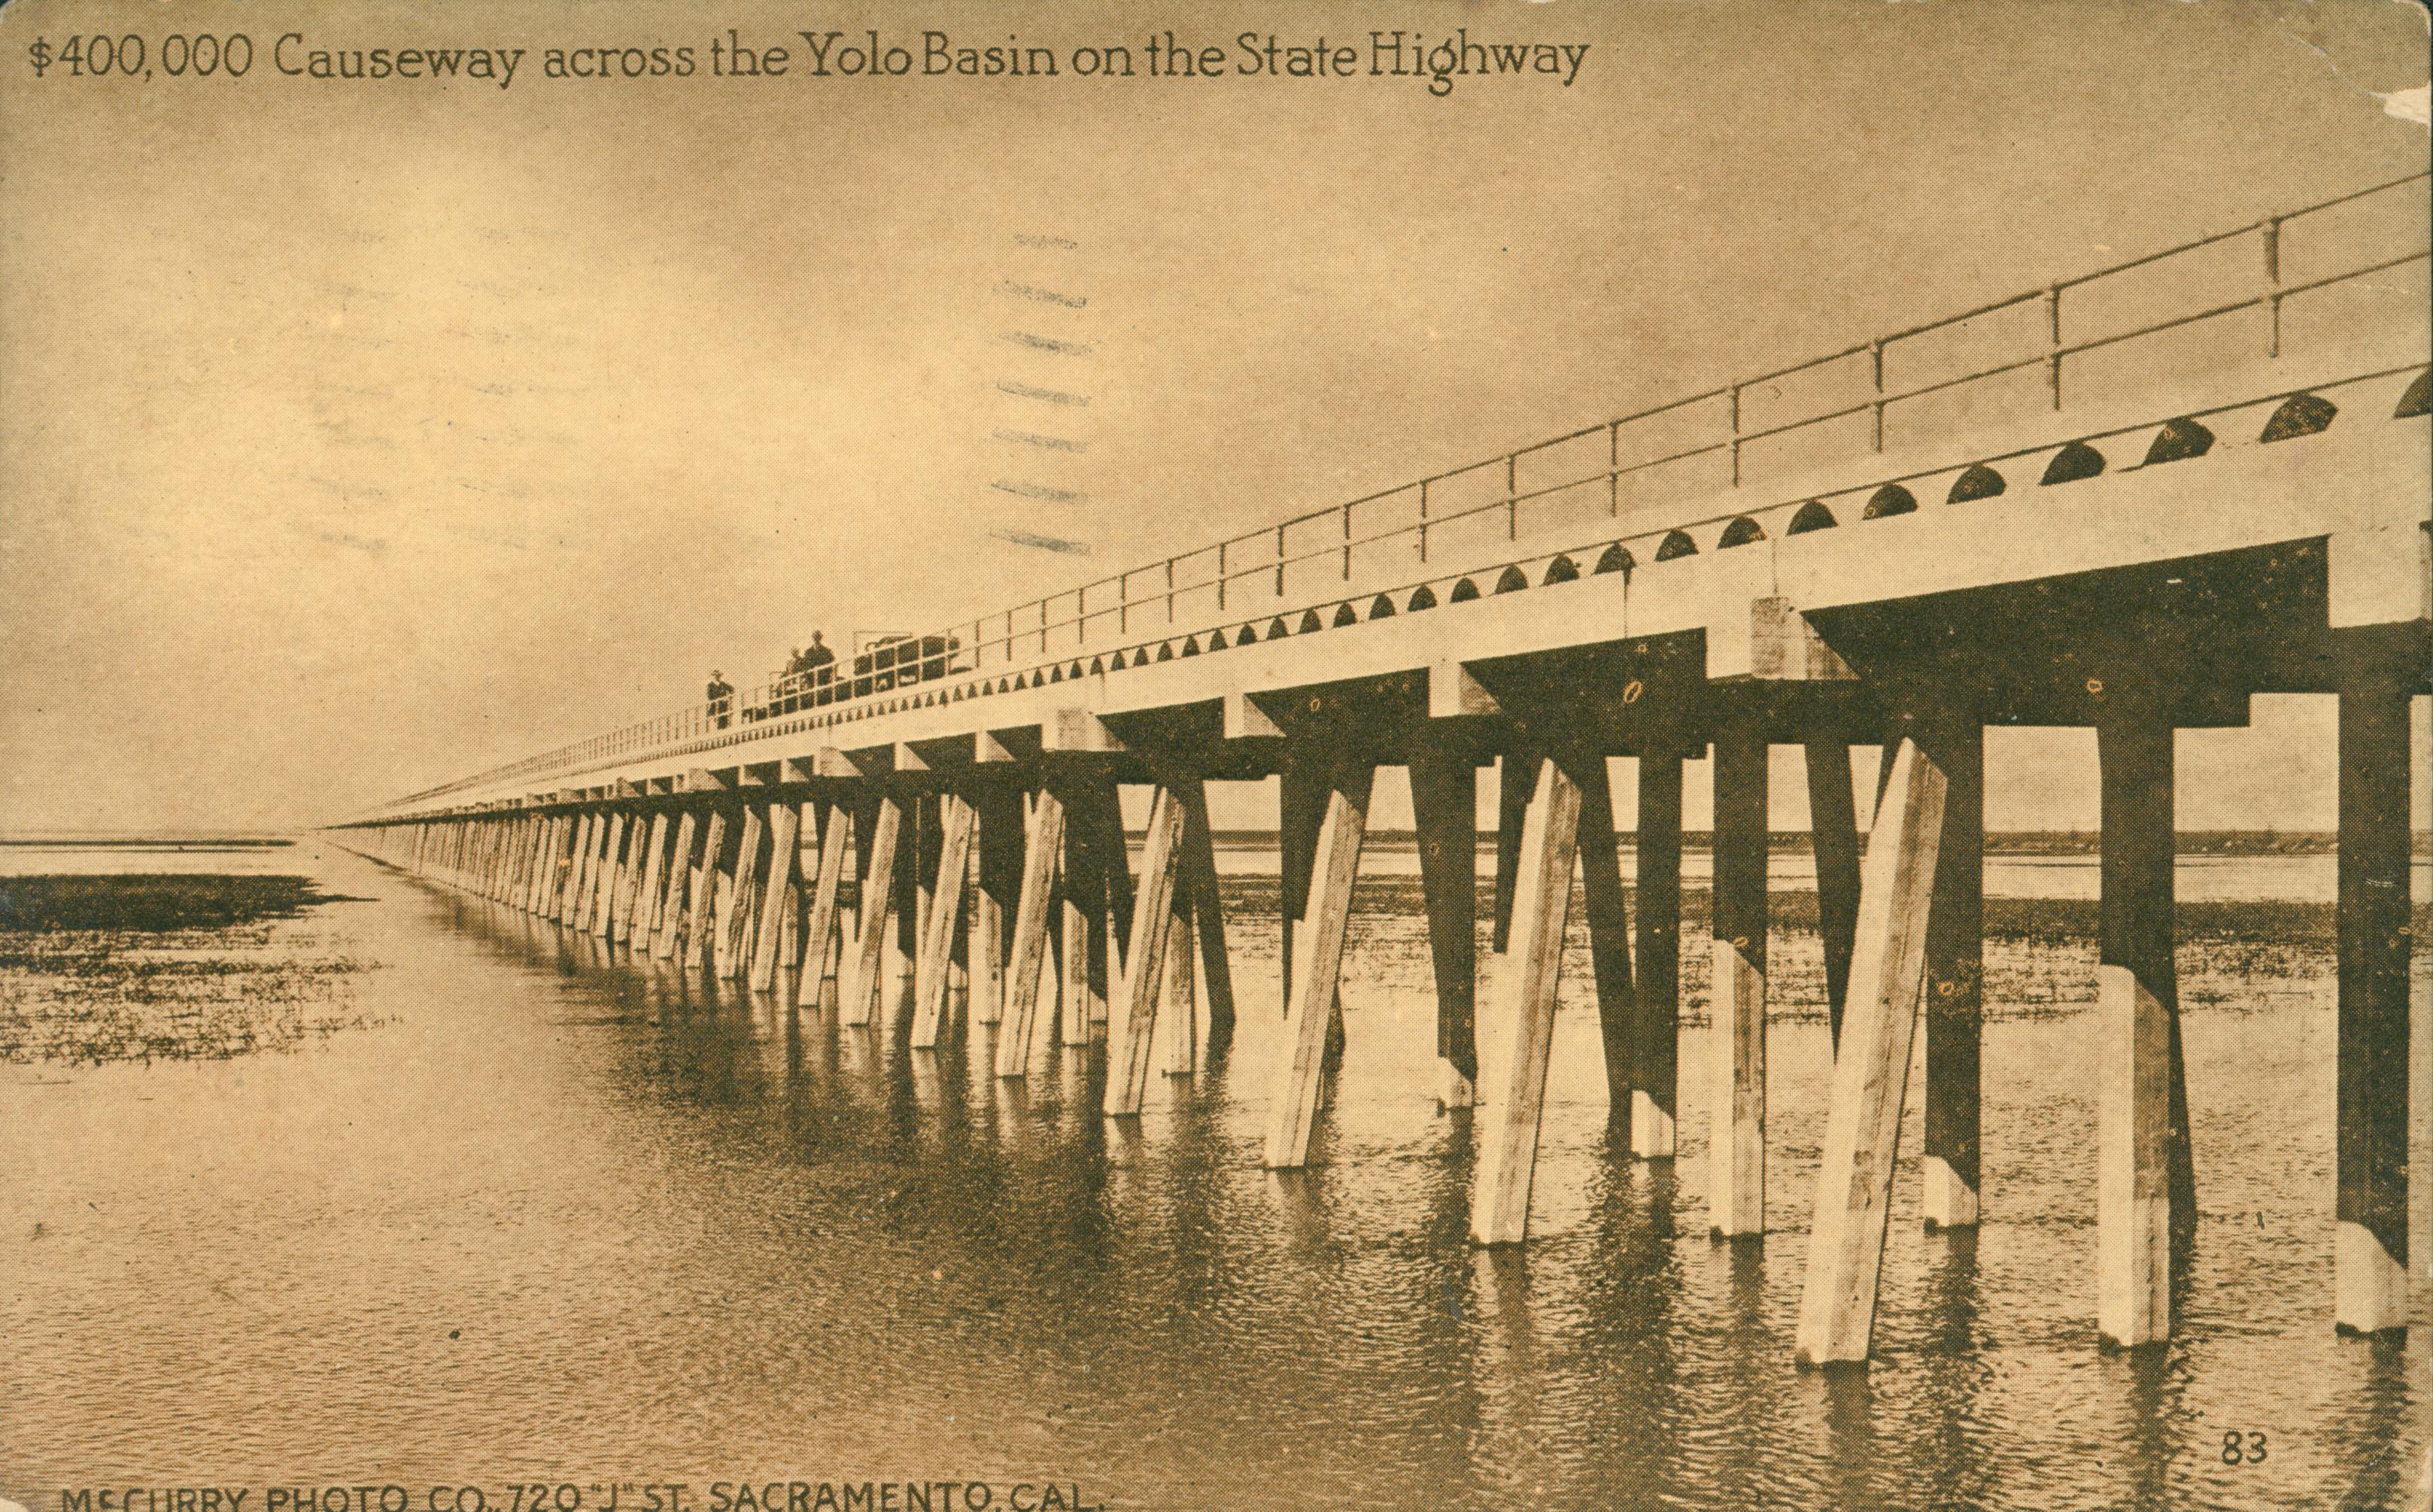 Shows the Yolo Causeway with two cars crossing it